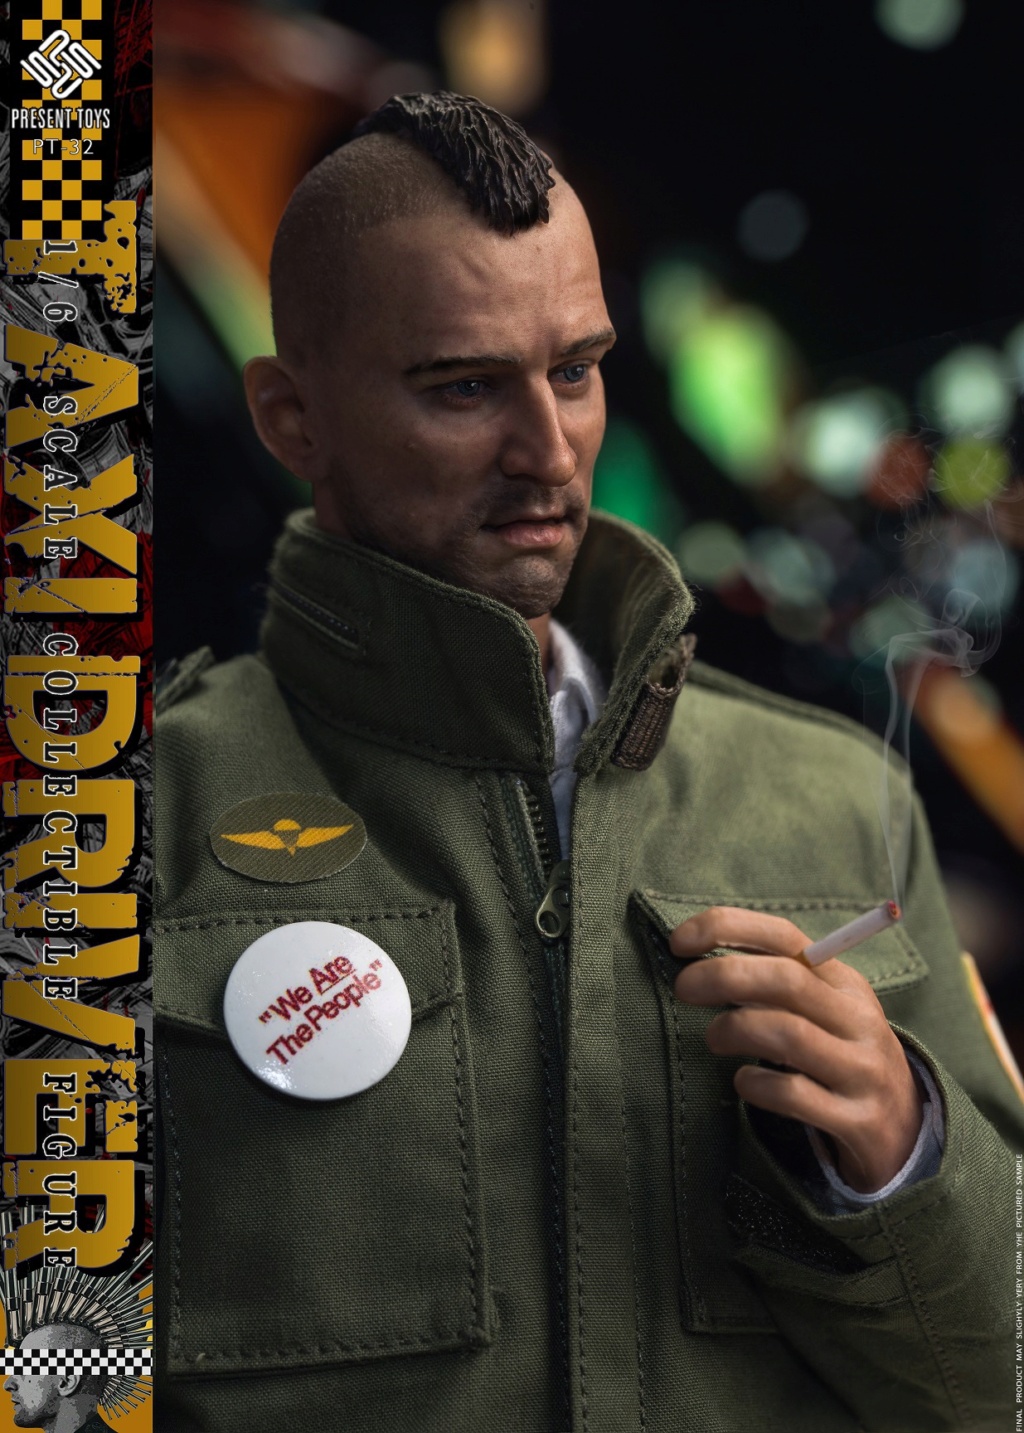 movie-based - NEW PRODUCT: Present Toys: 1/6 "Taxi Driver" Collection Doll#PT-sp32 18192510